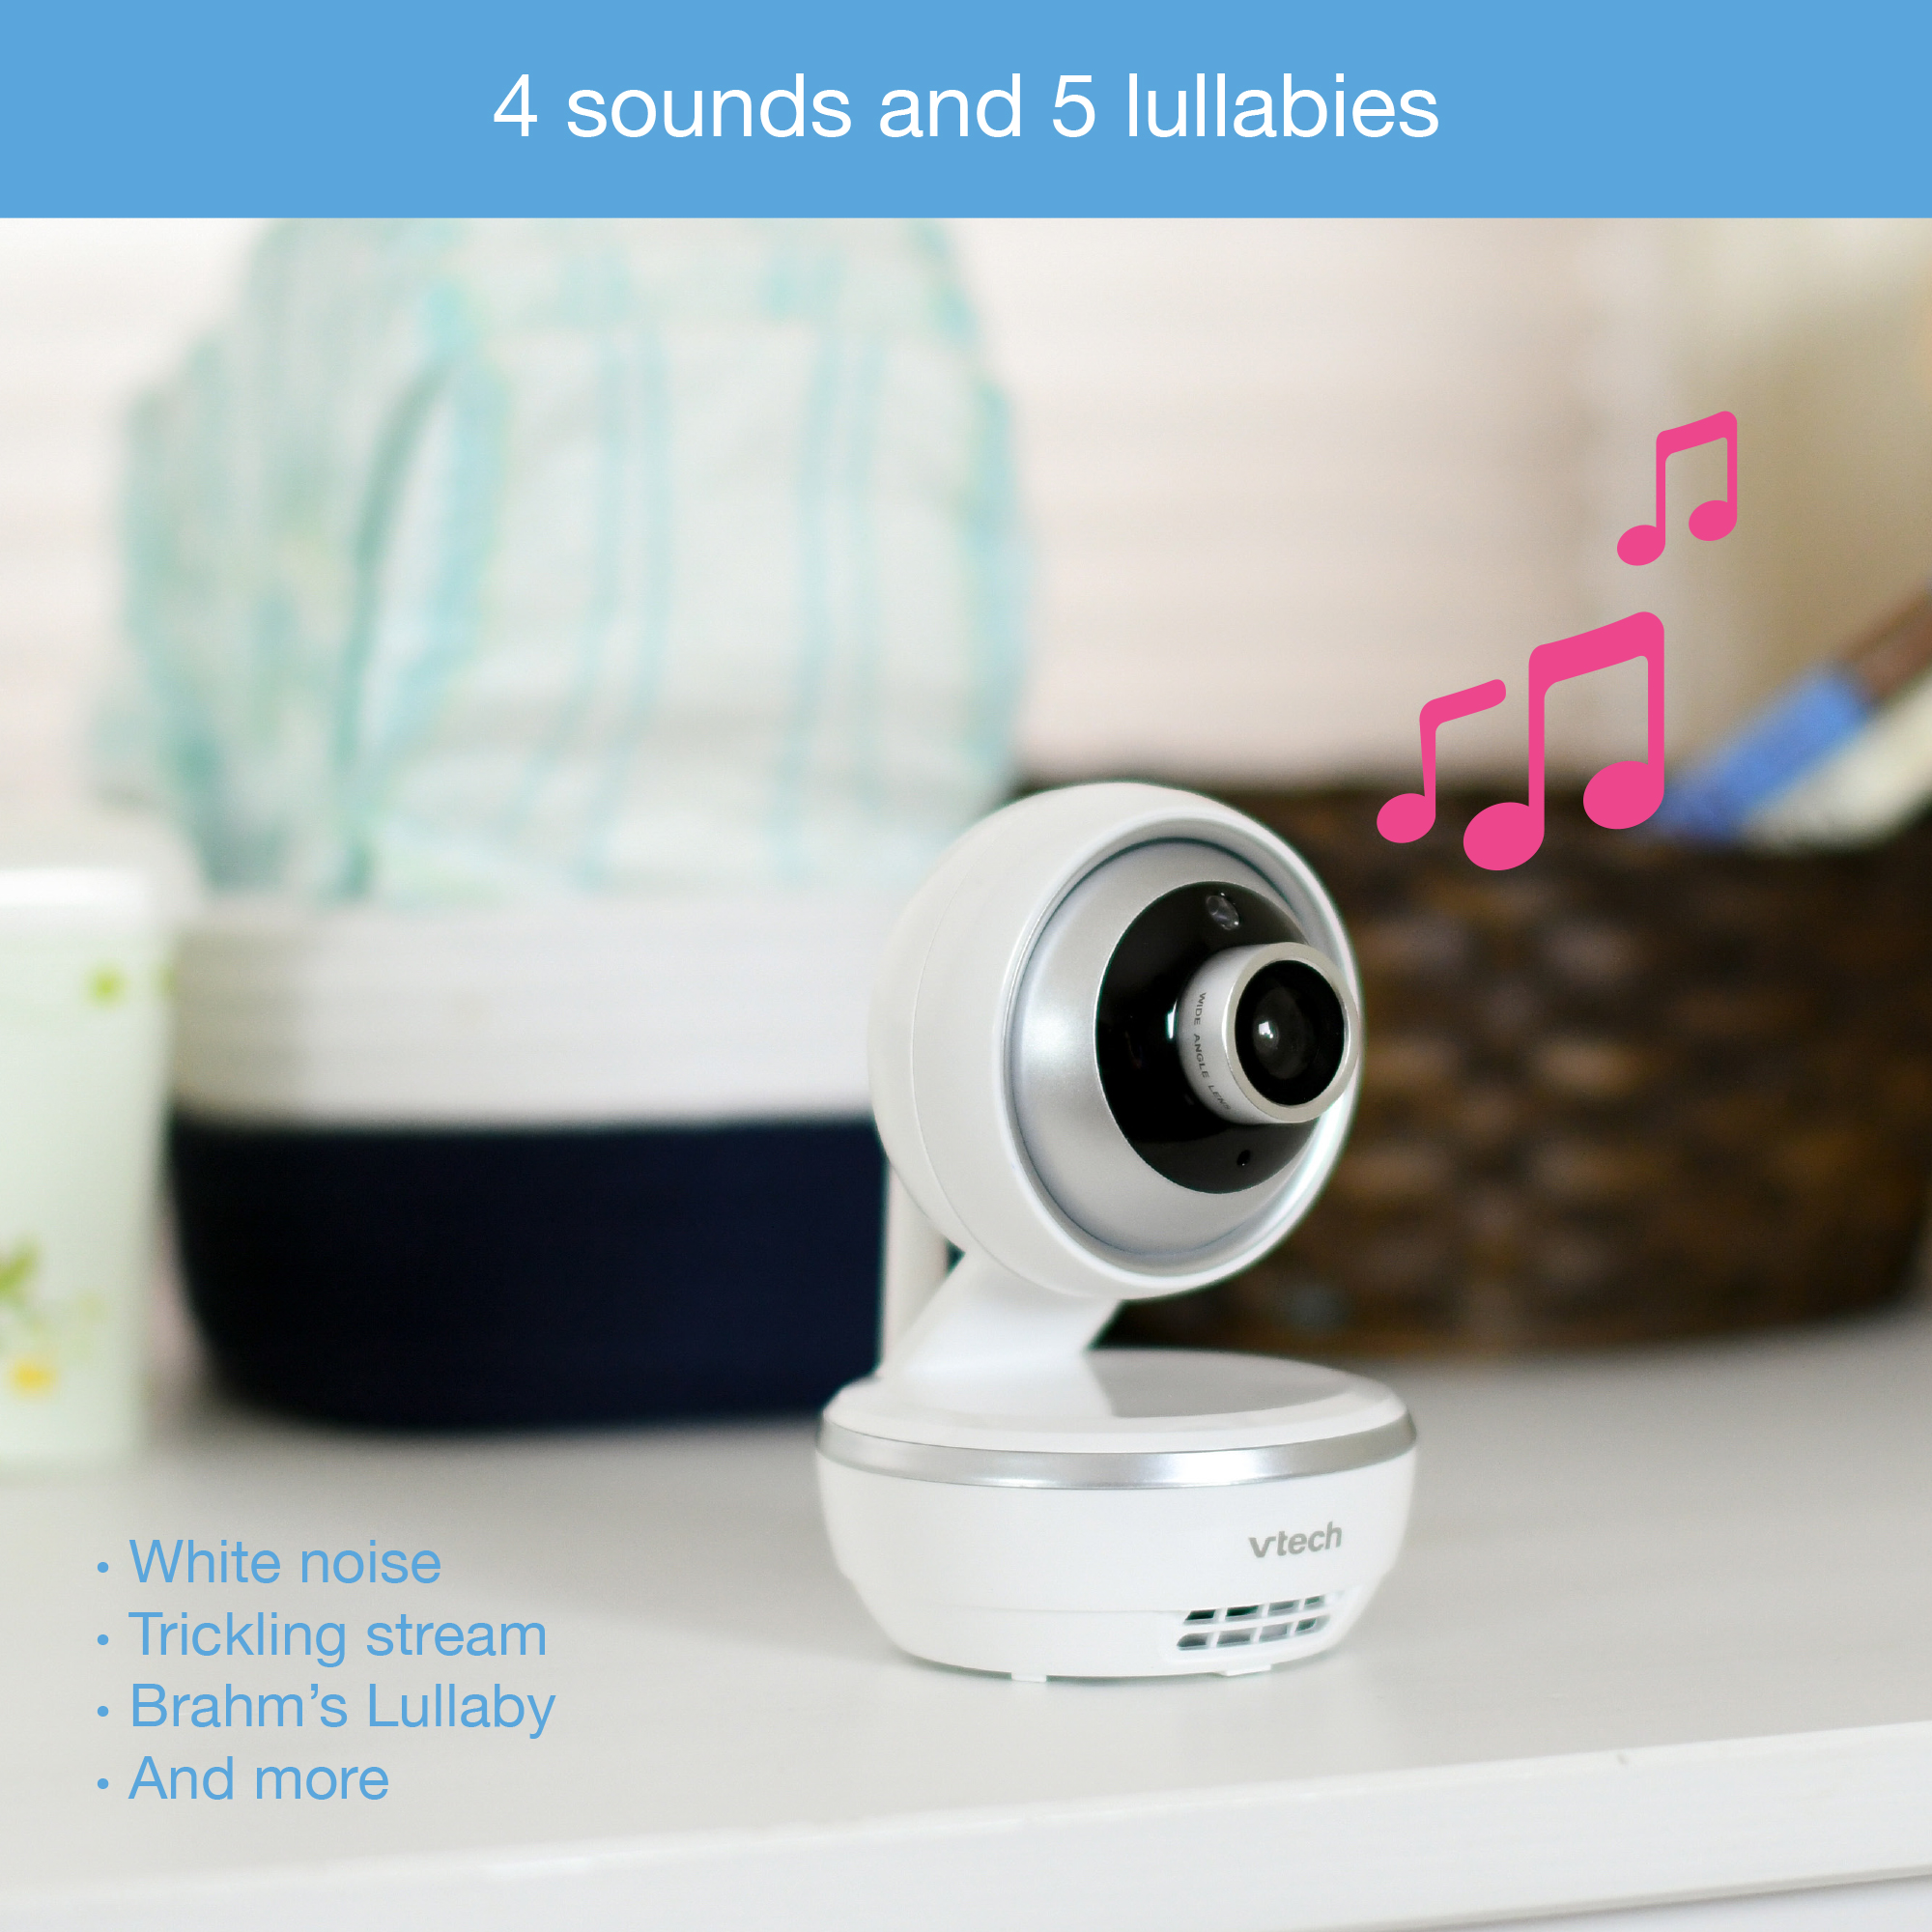 VTech VM4261, 4.3" Digital Video Baby Monitor with Pan & Tilt Camera, Wide-Angle Lens and Standard Lens, White - image 9 of 13